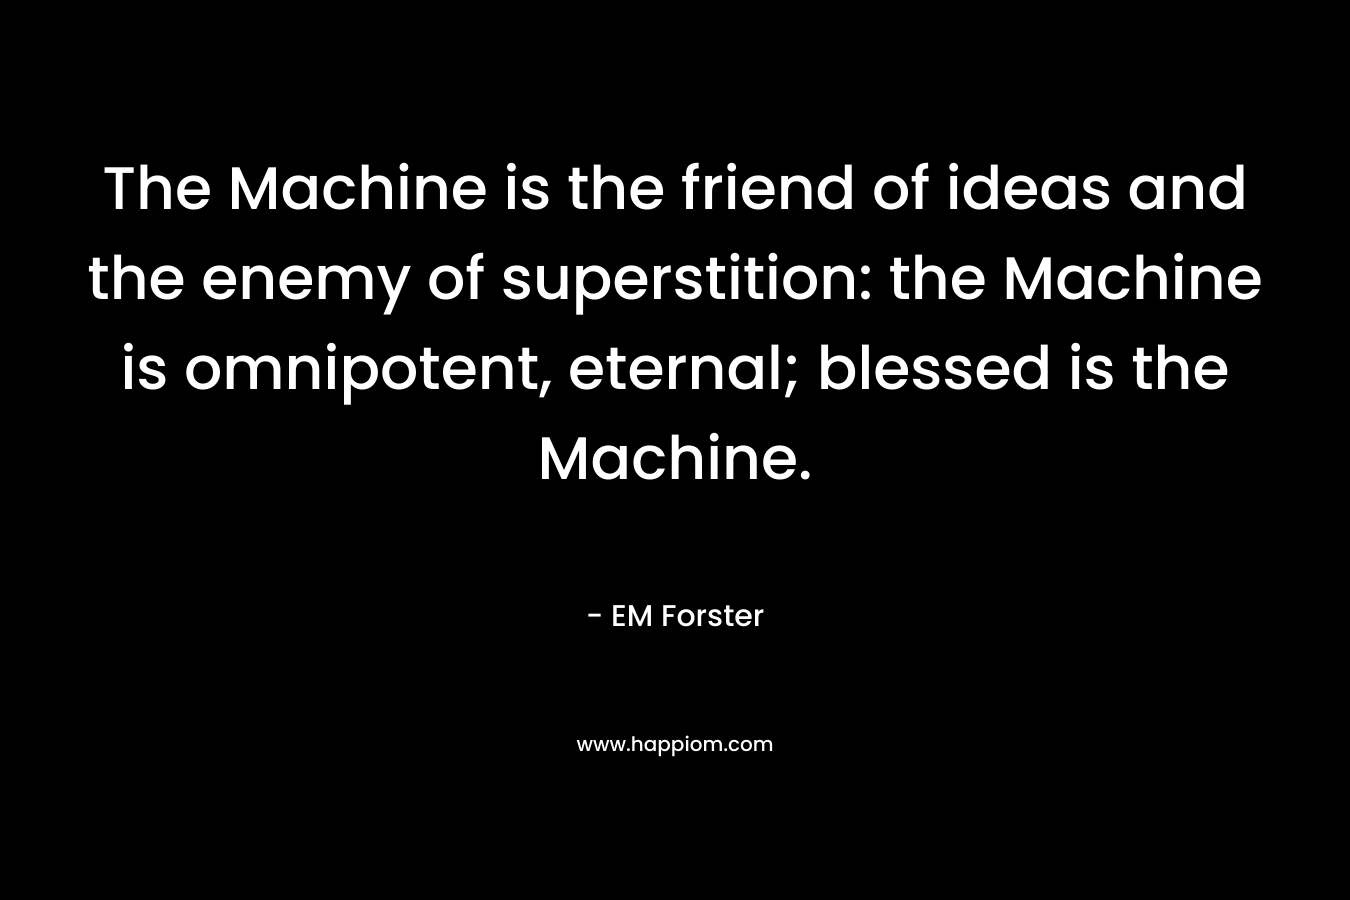 The Machine is the friend of ideas and the enemy of superstition: the Machine is omnipotent, eternal; blessed is the Machine.